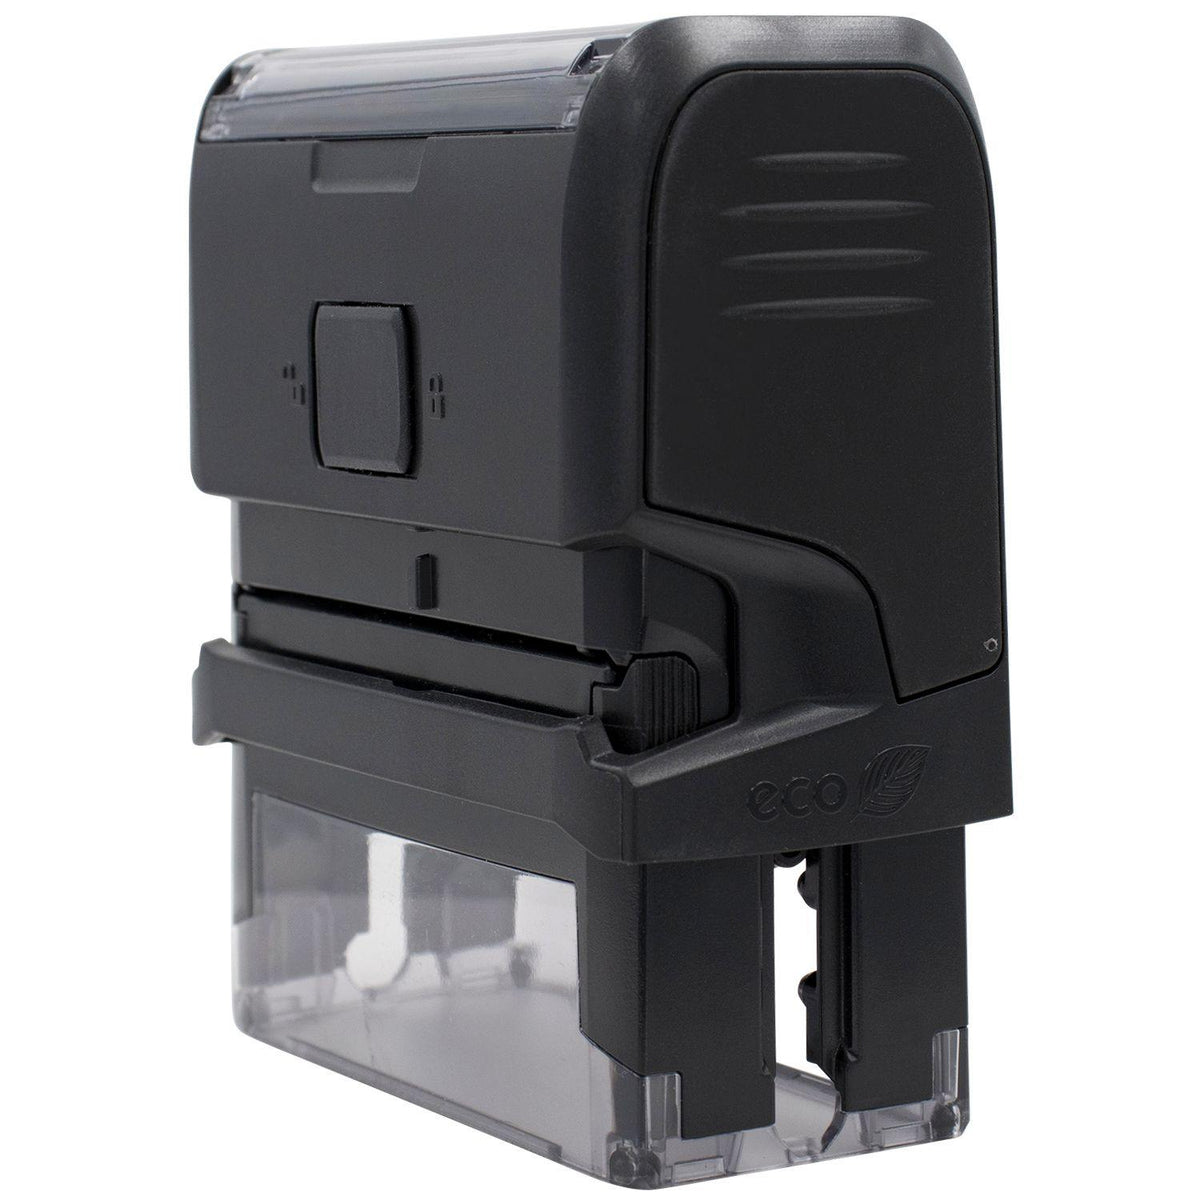 Large Self Inking Good Job Stamp - Engineer Seal Stamps - Brand_Trodat, Impression Size_Large, Stamp Type_Self-Inking Stamp, Type of Use_Teacher